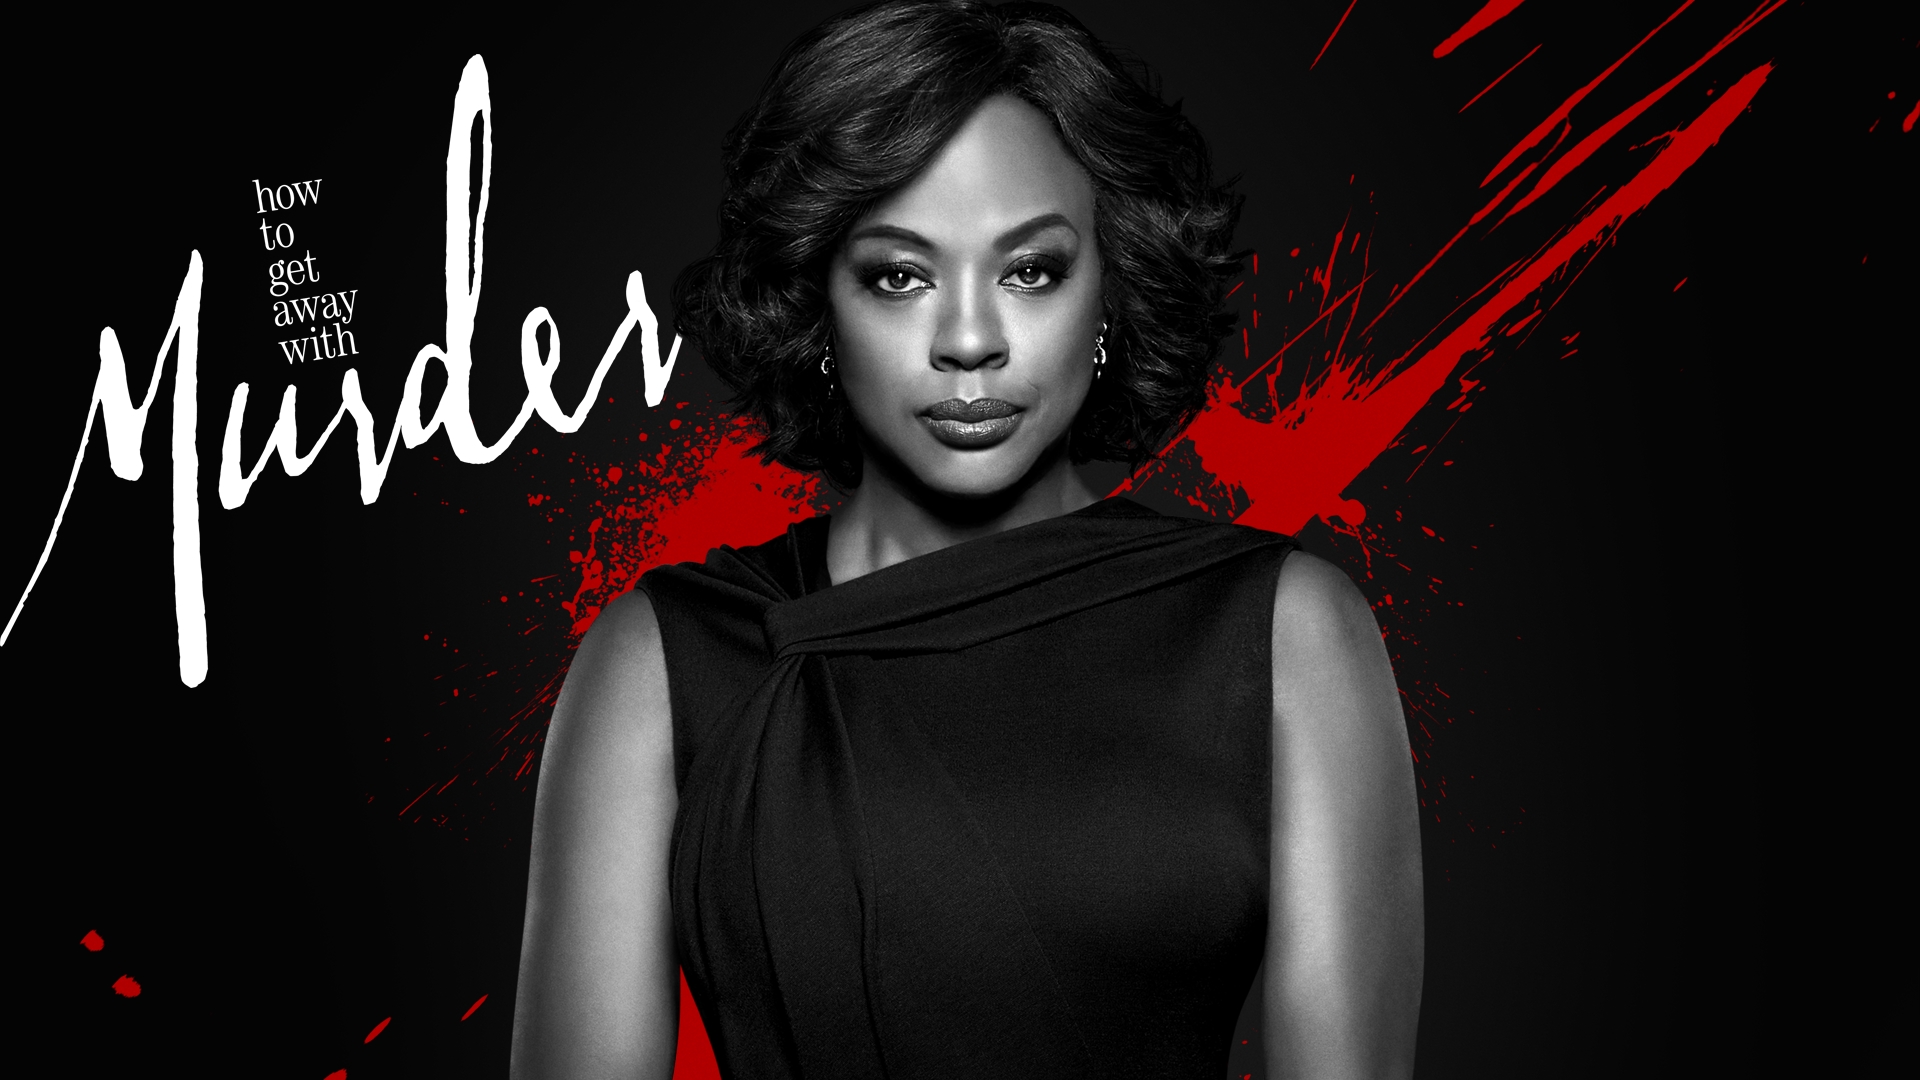 How To Get Away With Murder #20